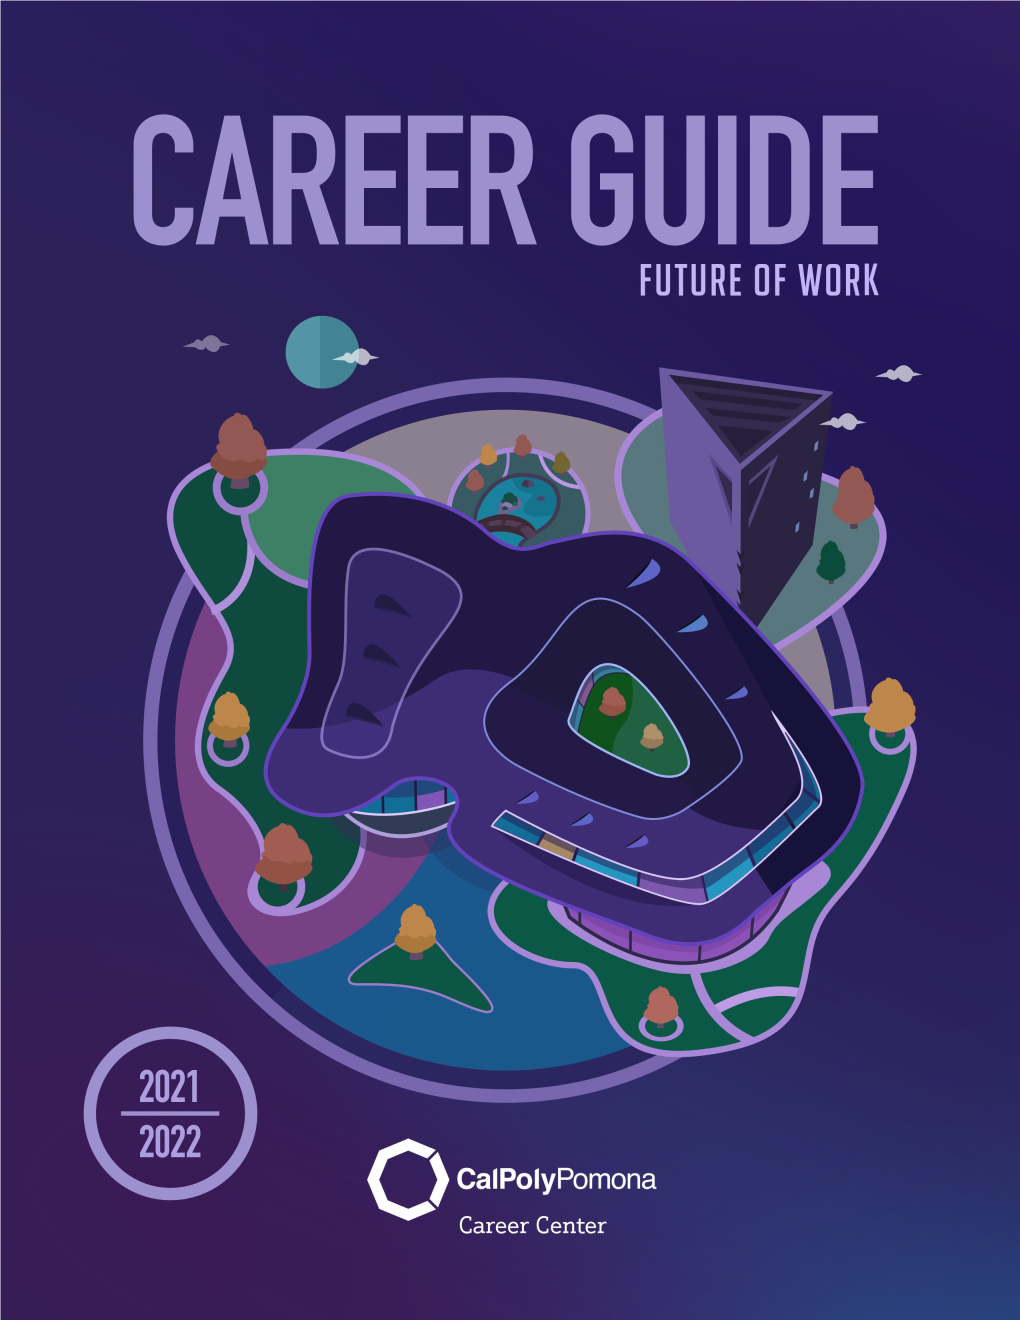 Career Guide Will Give You an Overview of Our Services and Important Information About Career Planning, Resumes, Cover Letters, Job Searching and Interviewing